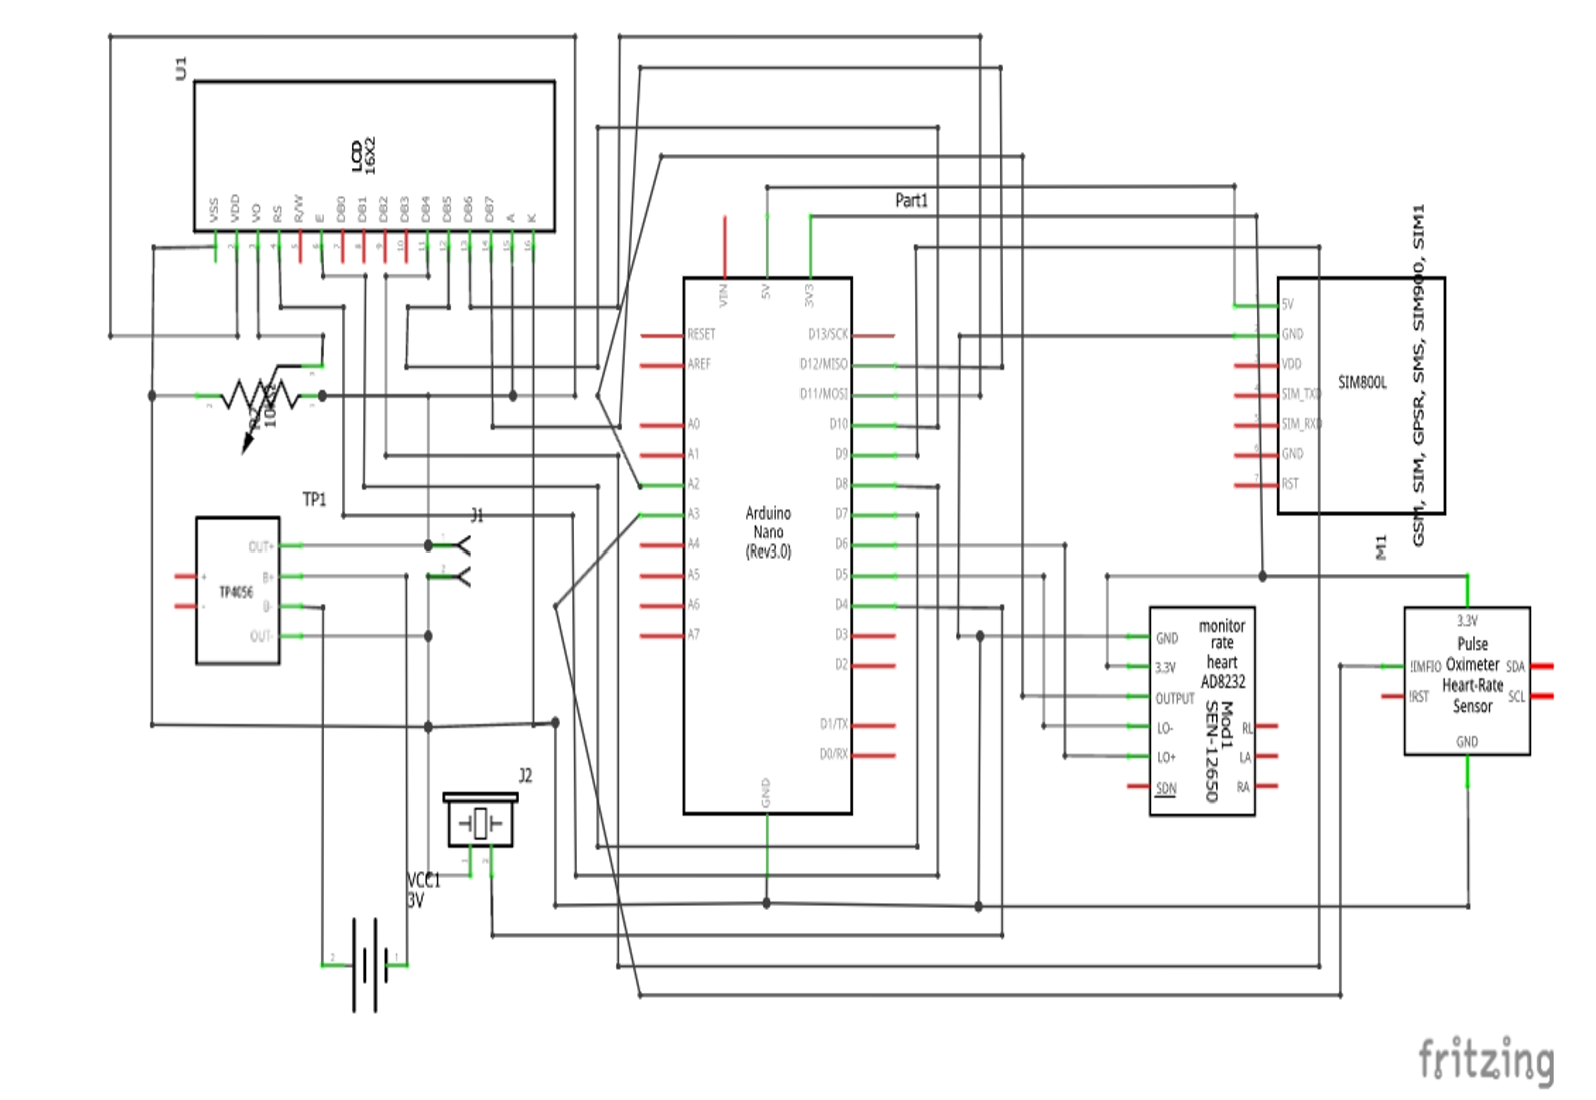 The complete circuit diagram of the project design